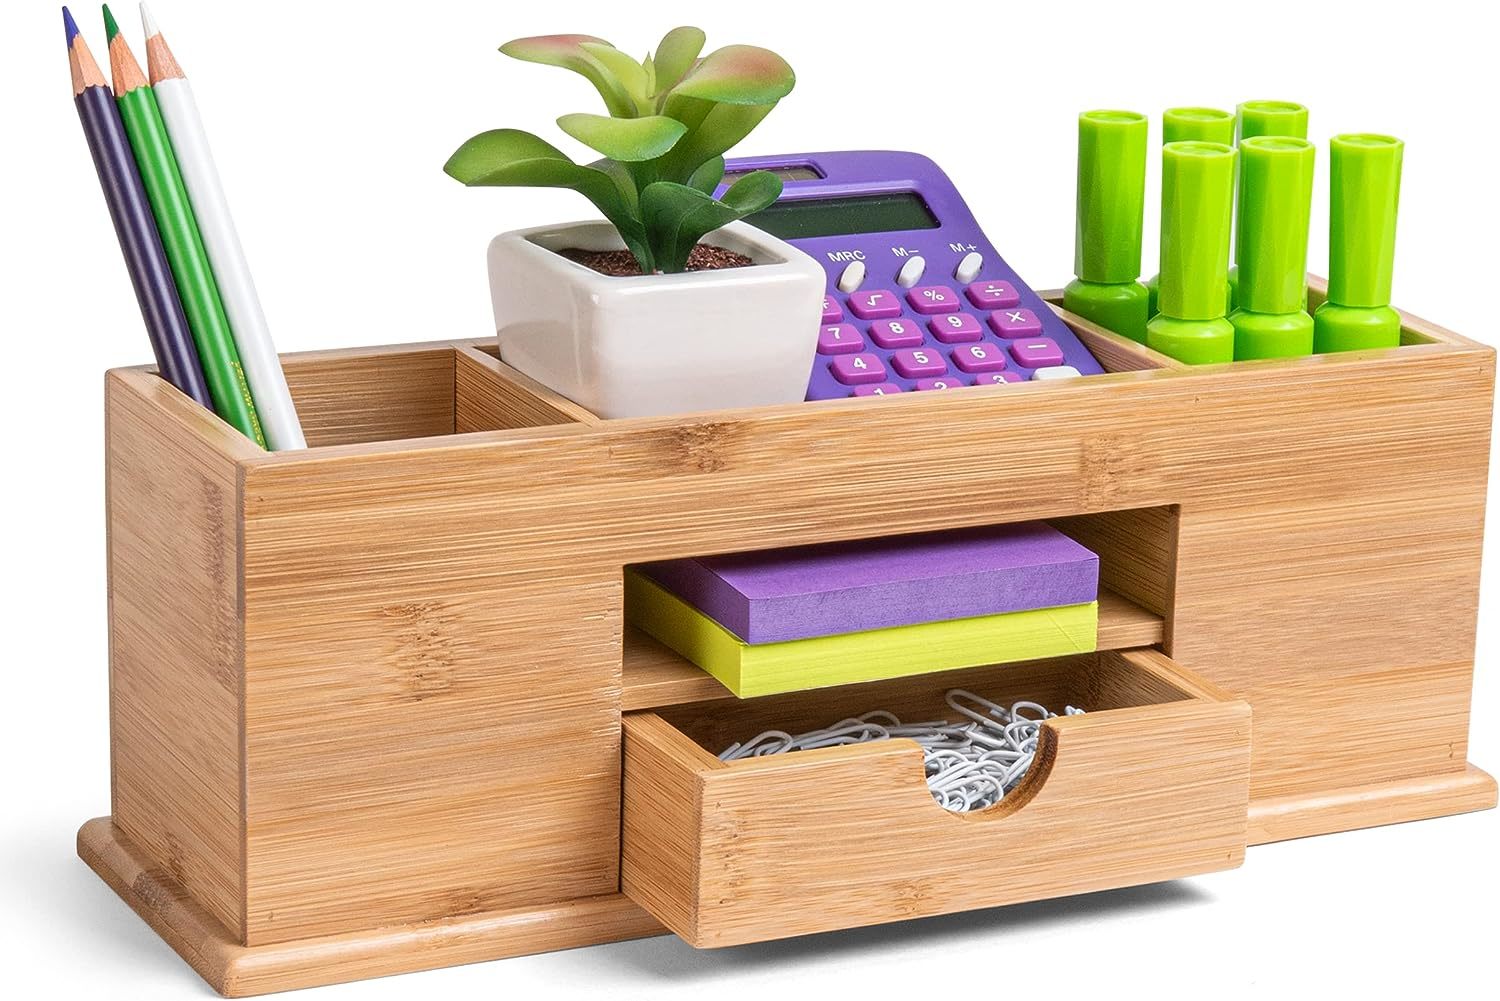 Primary image for For All Of Your Office And Home Needs, Missionmax Offers A Small Bamboo Caddy